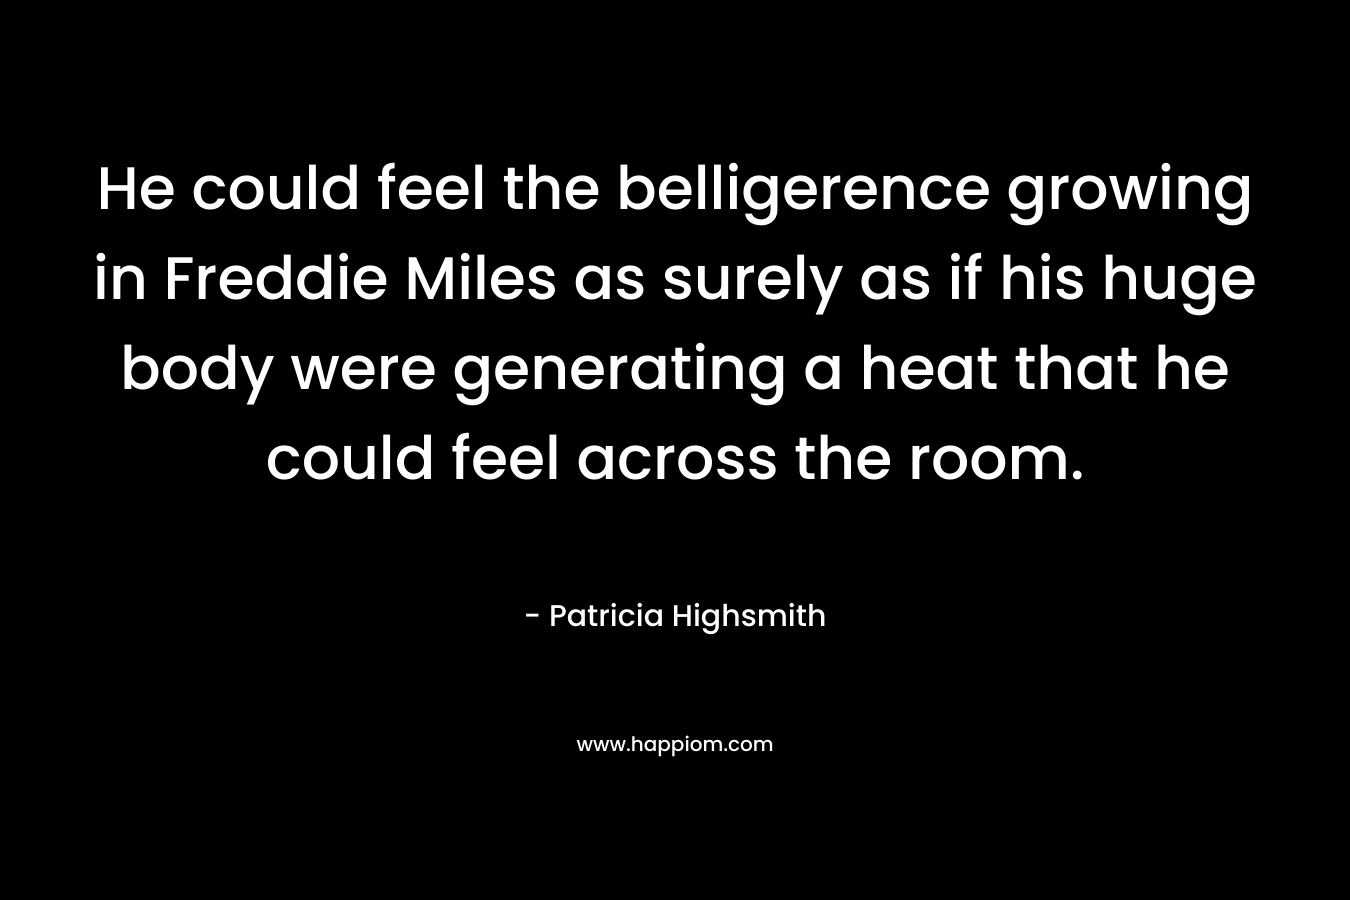 He could feel the belligerence growing in Freddie Miles as surely as if his huge body were generating a heat that he could feel across the room. – Patricia Highsmith